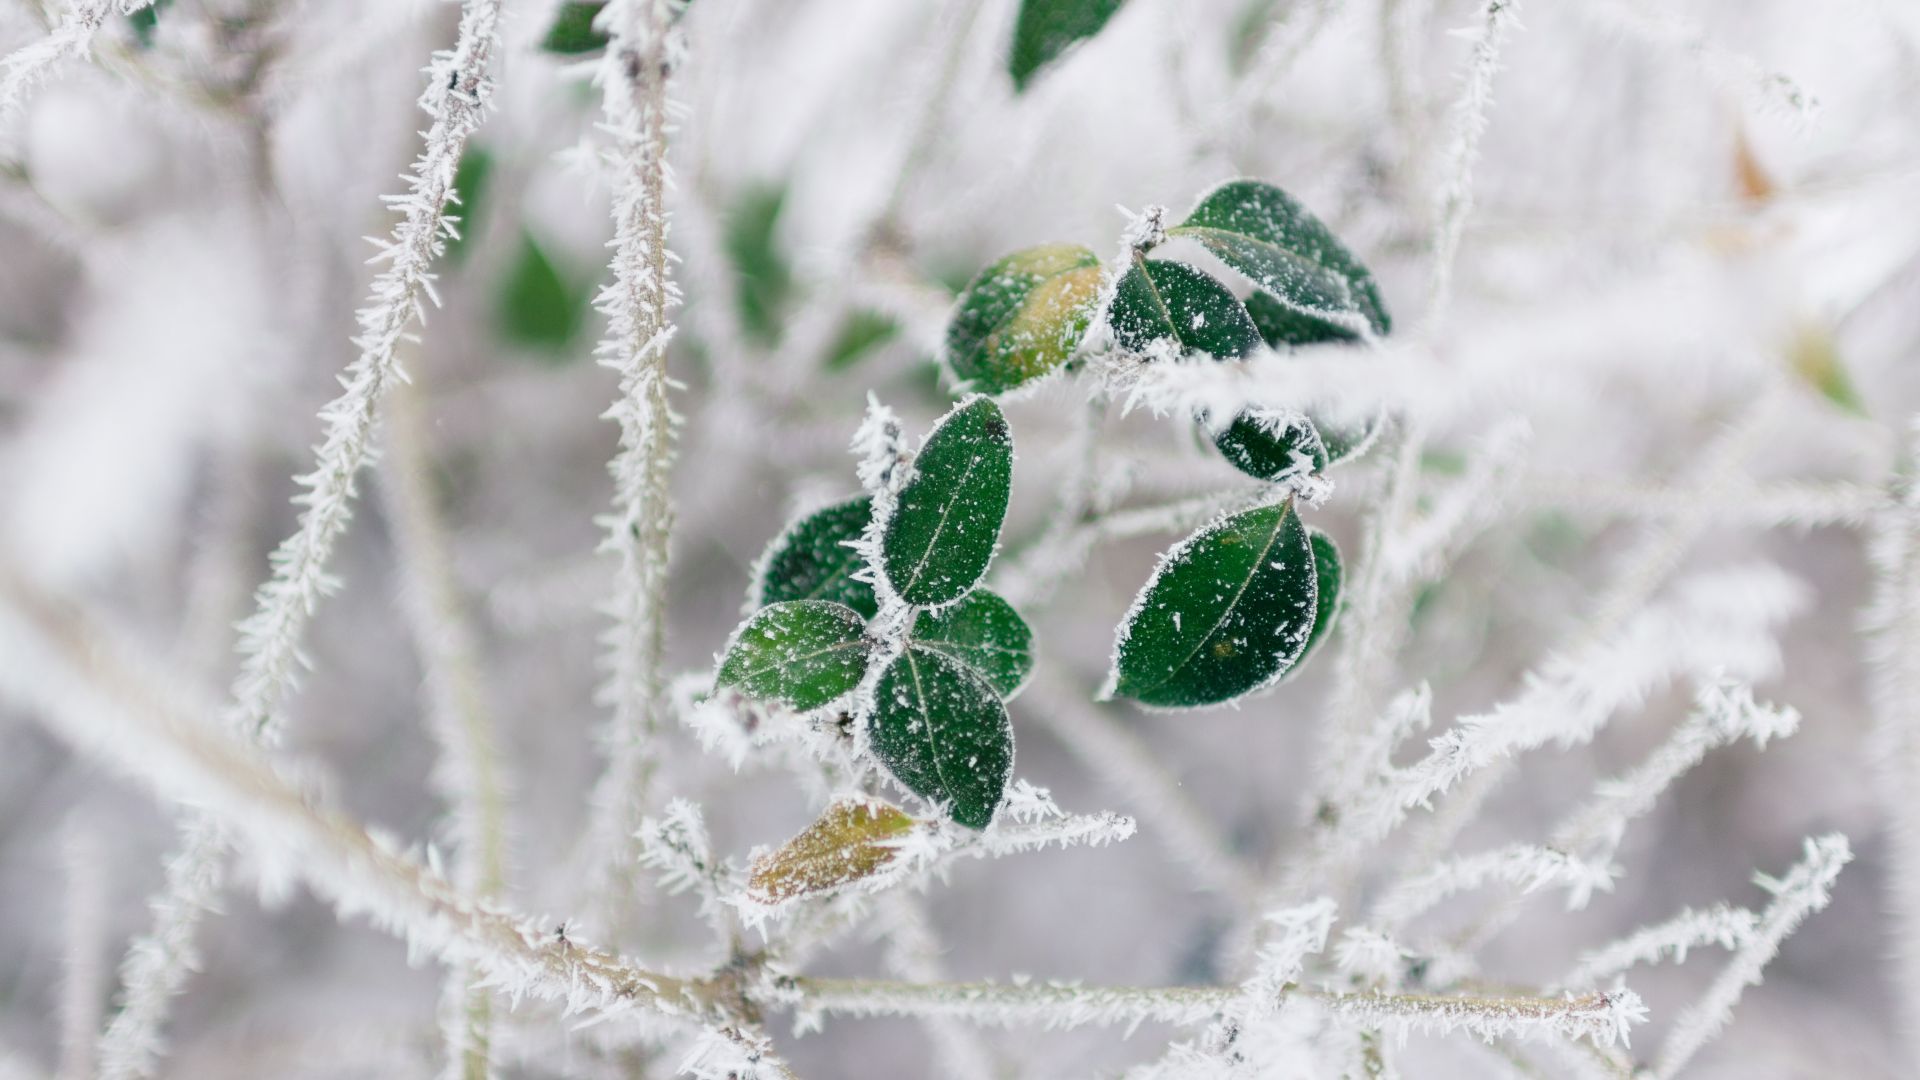 Desktop Wallpapers Tree Branch, Frost, Winter, Leaves, Hd Image, Picture, Background, Uceklg